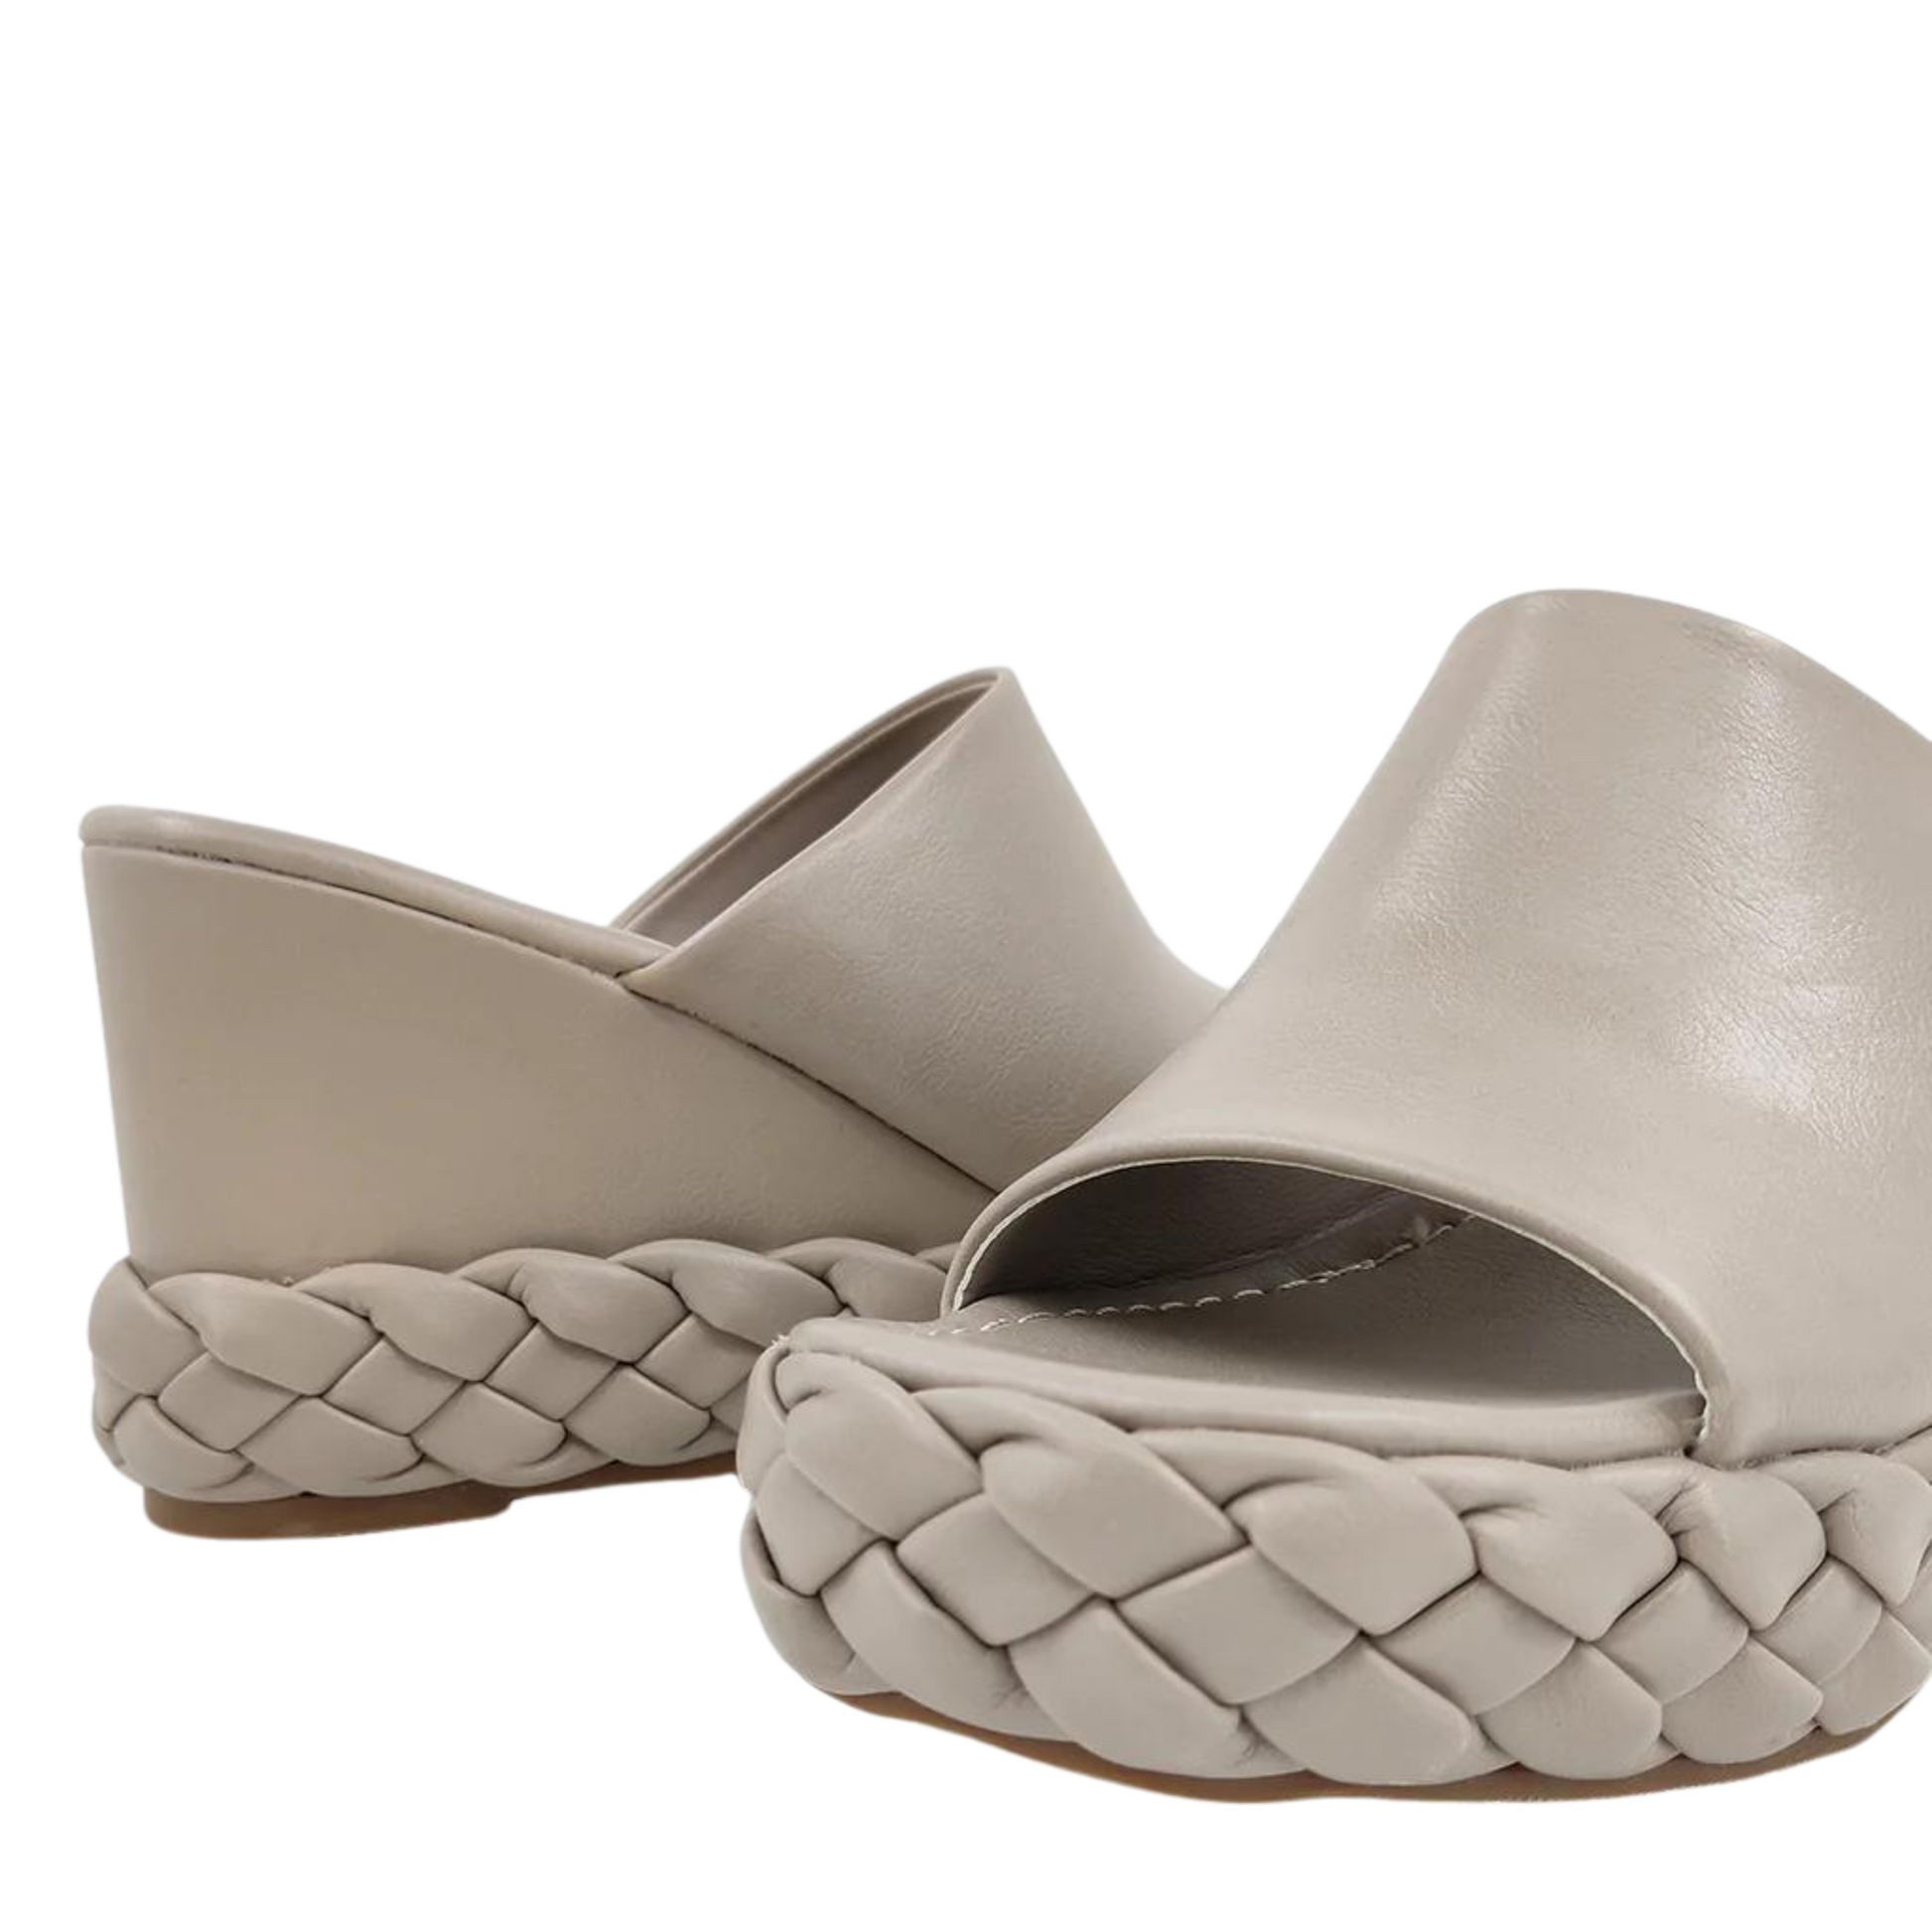 Letizia sandals provide an elegant, modern look with their braided sole and open toe wedge design. The taupe and black colors guarantee they can match any outfit. Enjoy complete comfort with these modern summer sandals.